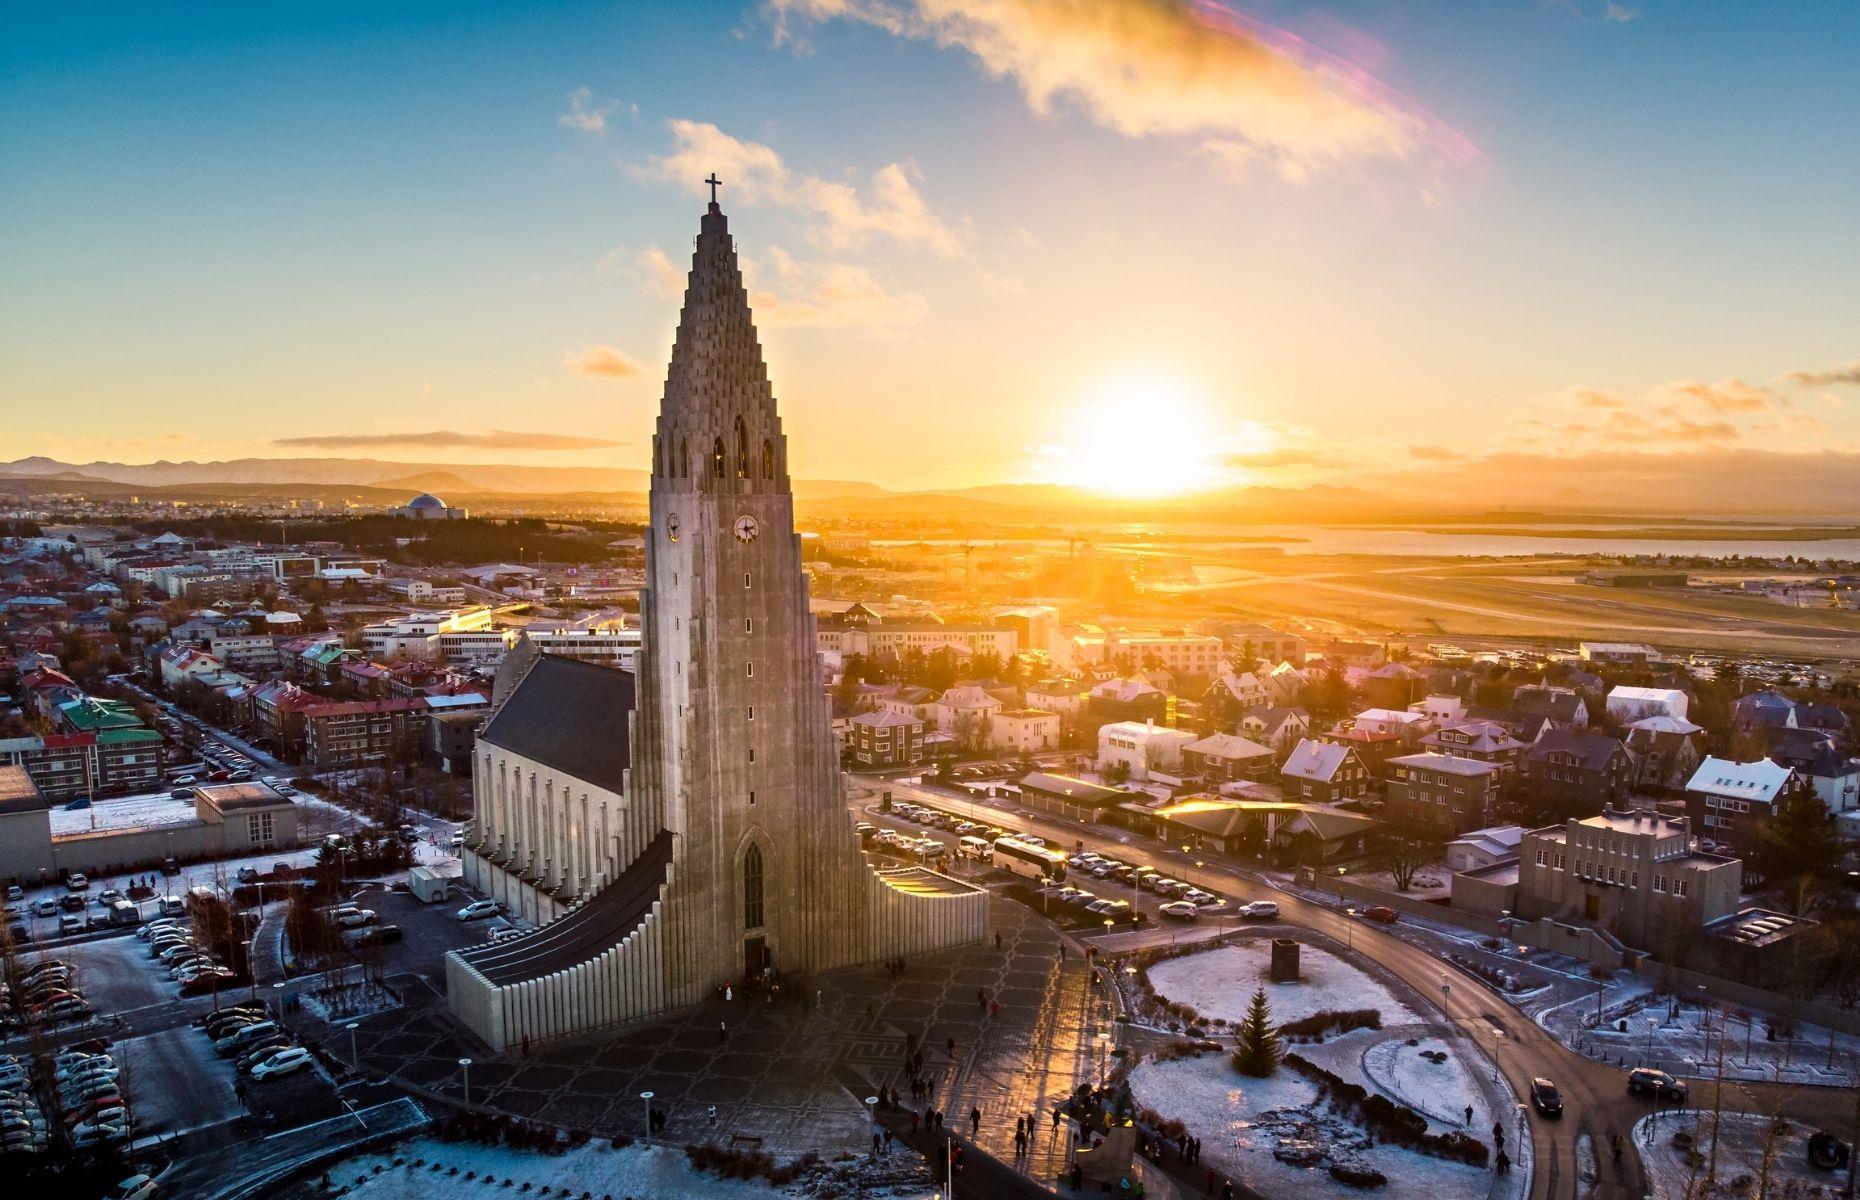 Amazing Photos Prove Iceland Is The Most Beautiful Country On Earth